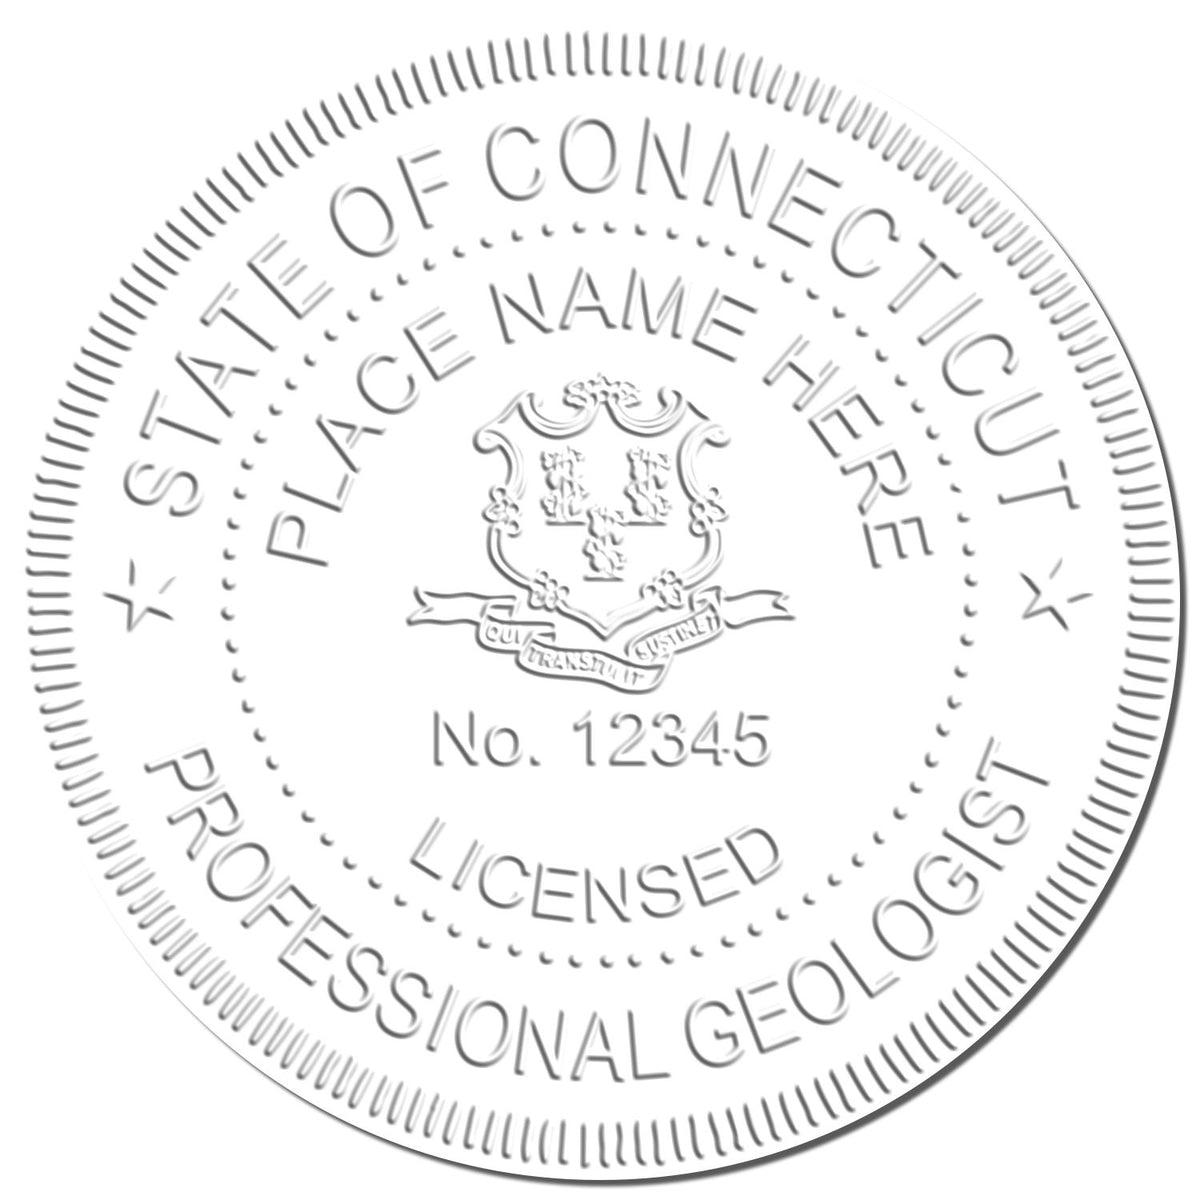 A stamped imprint of the Gift Connecticut Geologist Seal in this stylish lifestyle photo, setting the tone for a unique and personalized product.